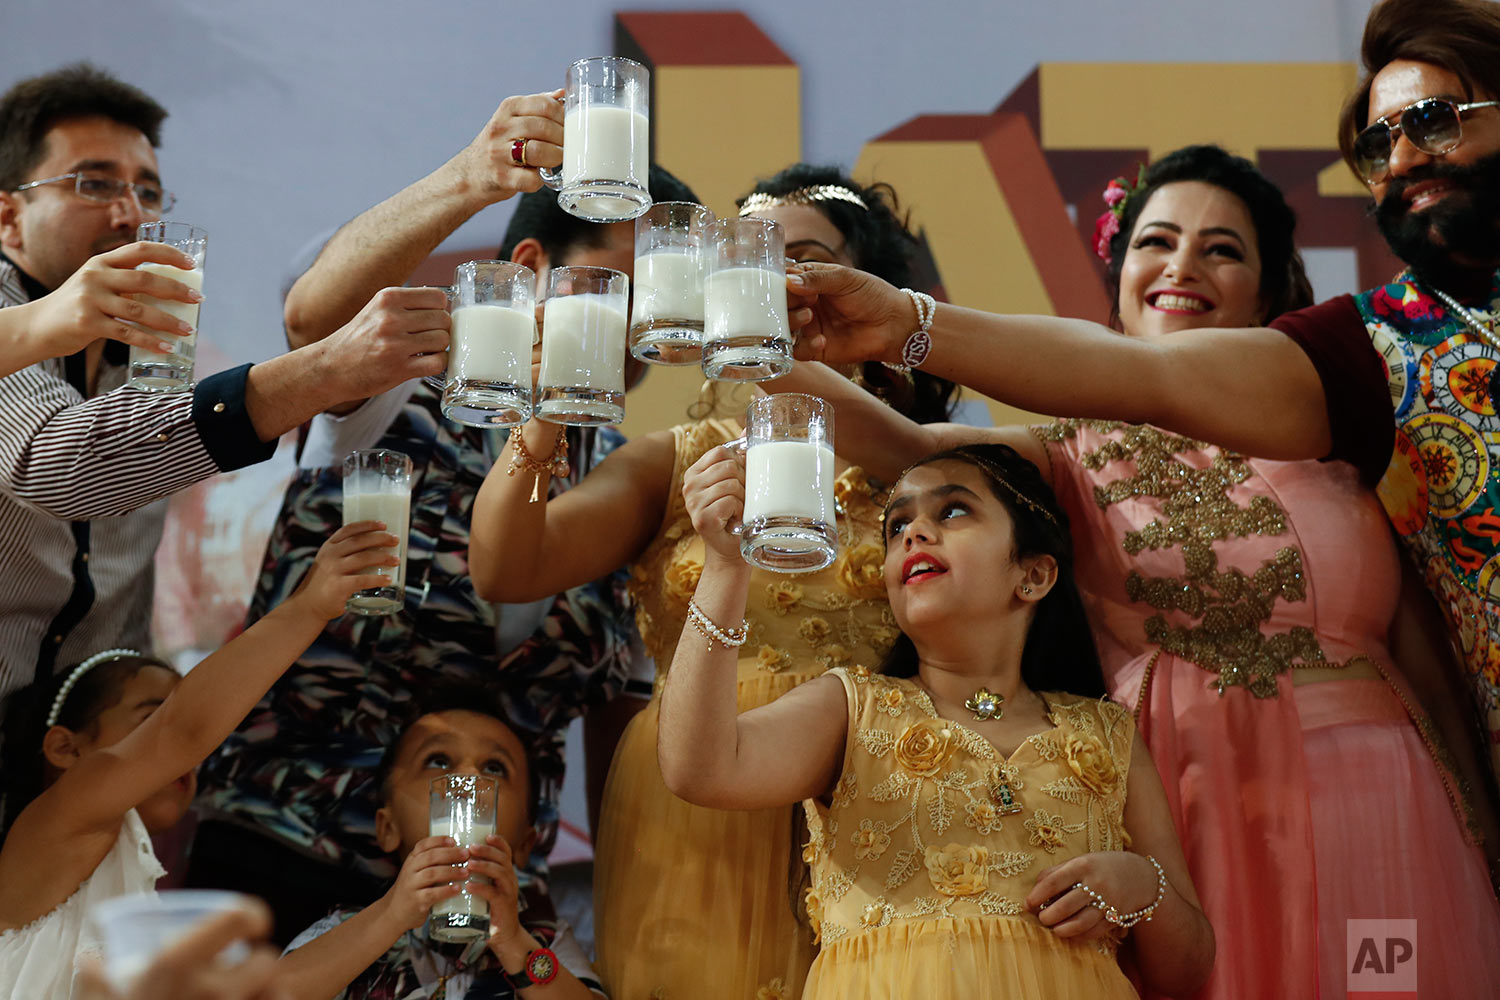  In this May 17, 2017 photo, Indian spiritual leader who calls himself Dr. Saint Gurmeet Singh Ram Rahim Insan, right, and others raise a toast with glasses of milk as they hold a 'Cow Milk Party' during the premiere of the movie "Jattu Engineer" in 